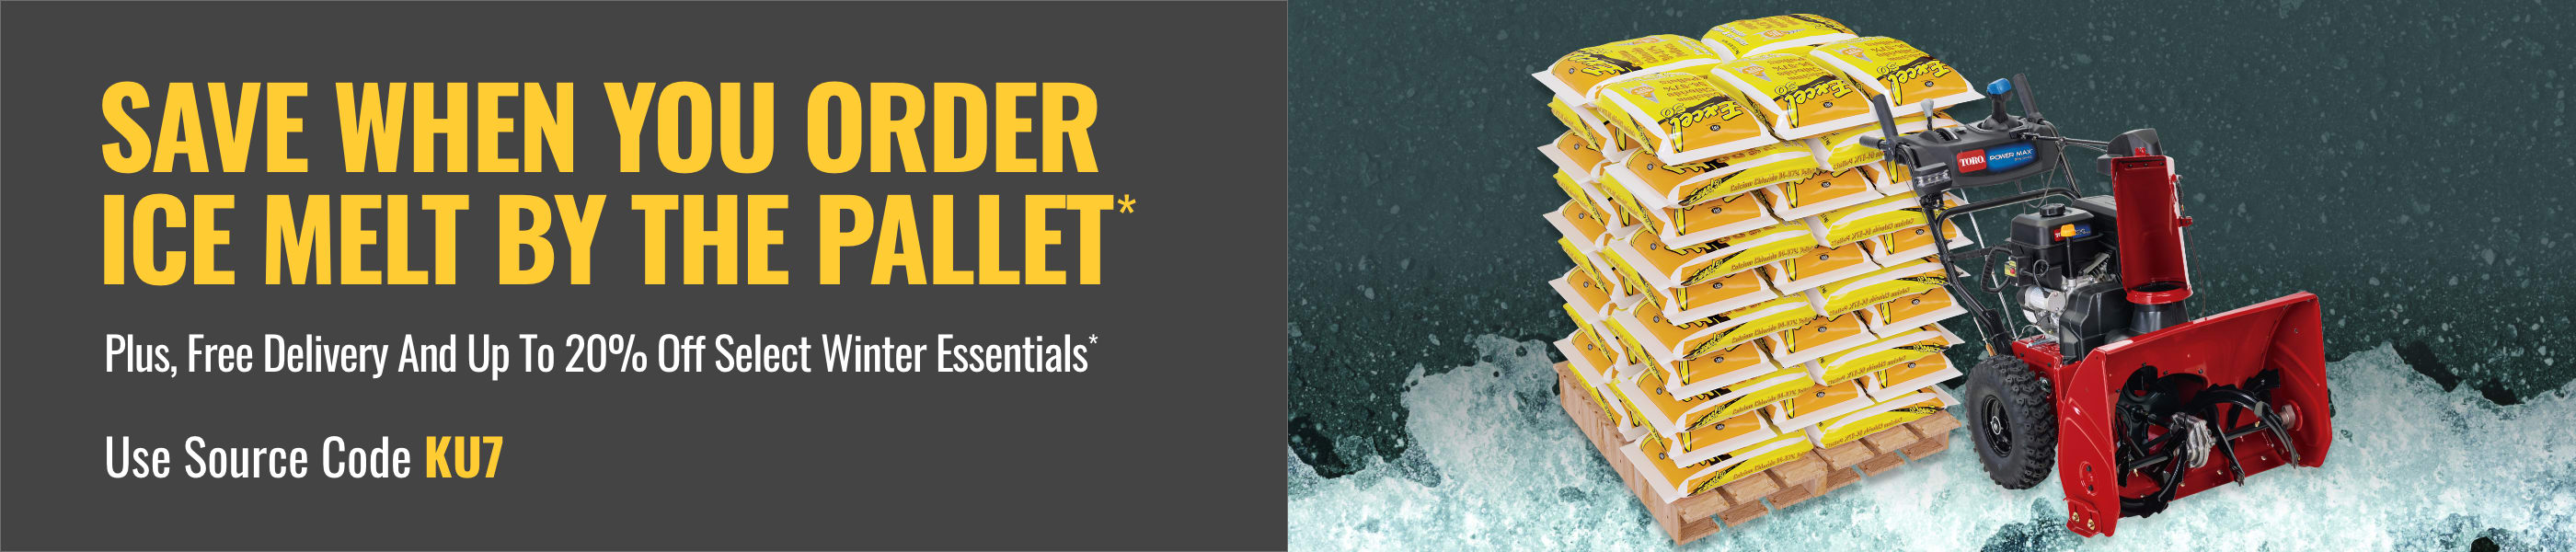 Save When You Order Ice Melt By The Pallet